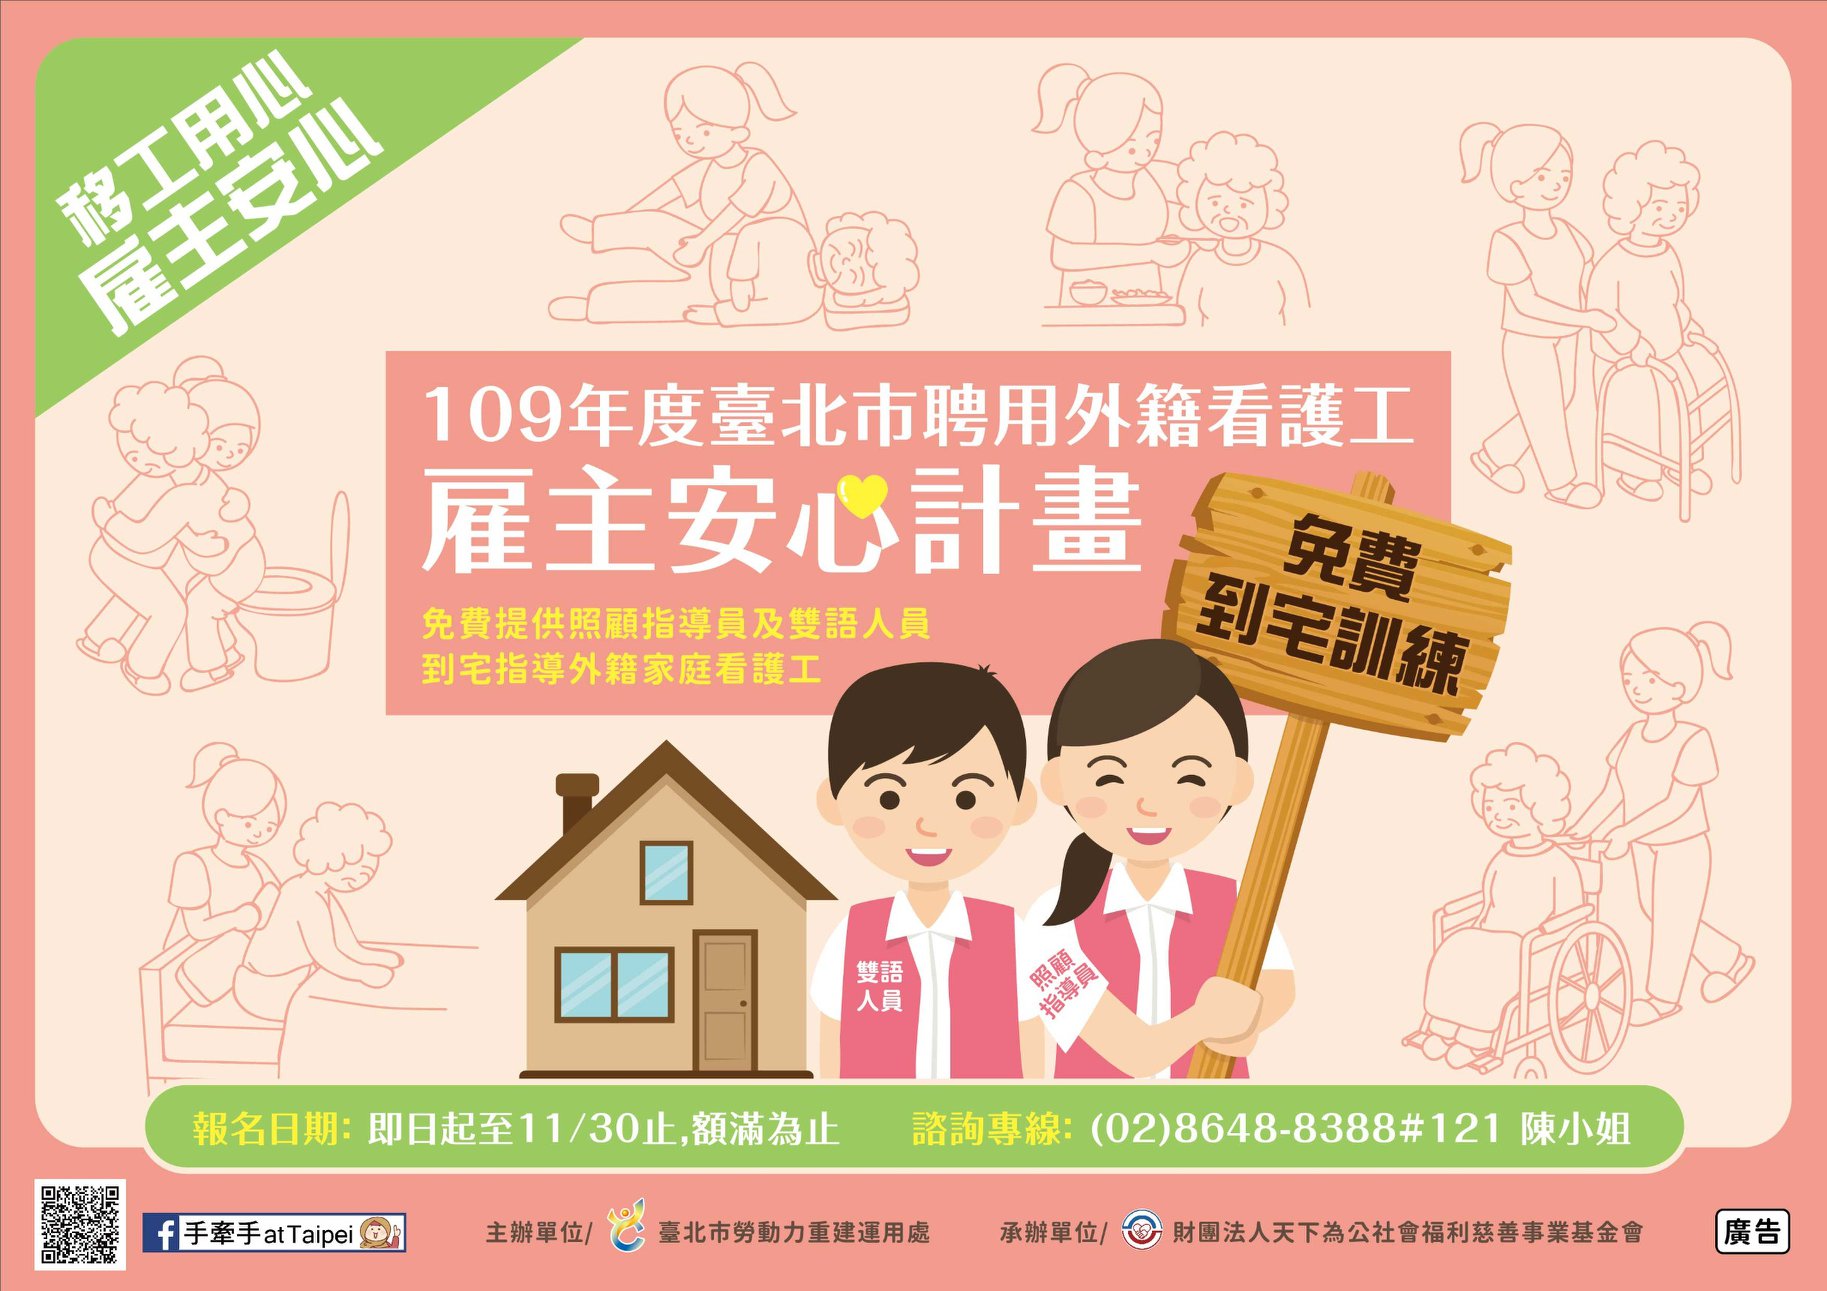 Taipei City Government continues to arrange professional nurses and bilingual interpreters to guide foreign caretakers to undertake caretaking services at care recipients' homes. Source: 手牽手at Taipei